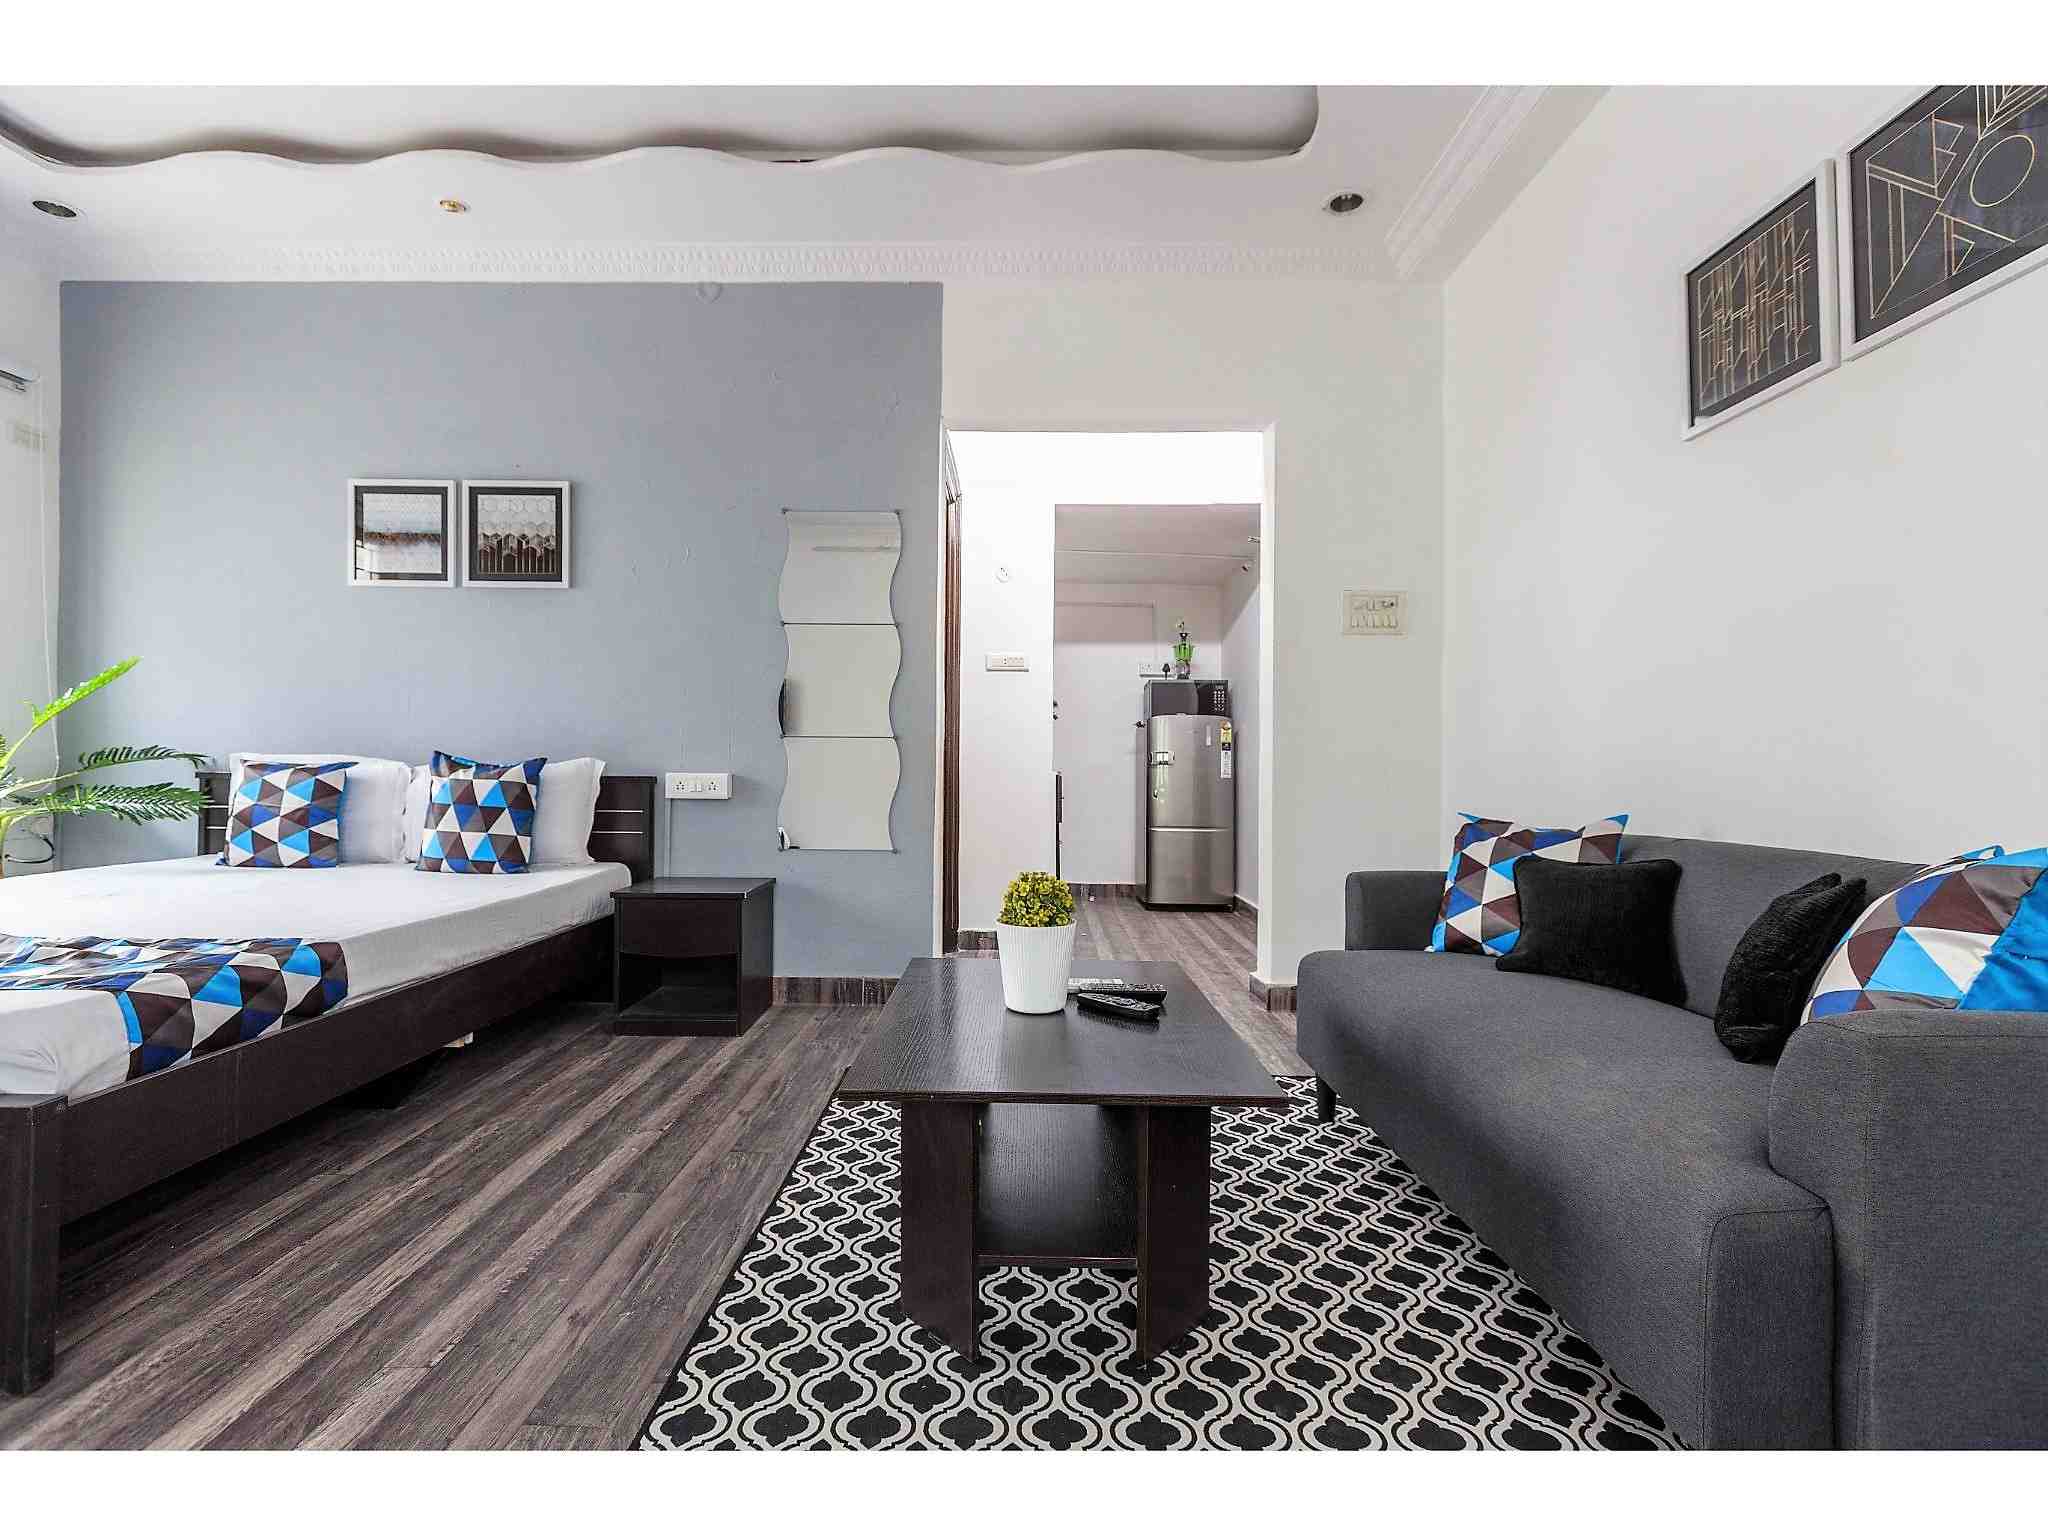 Service apartments Gurgaon Offers the Great luxury Accommodations for rental